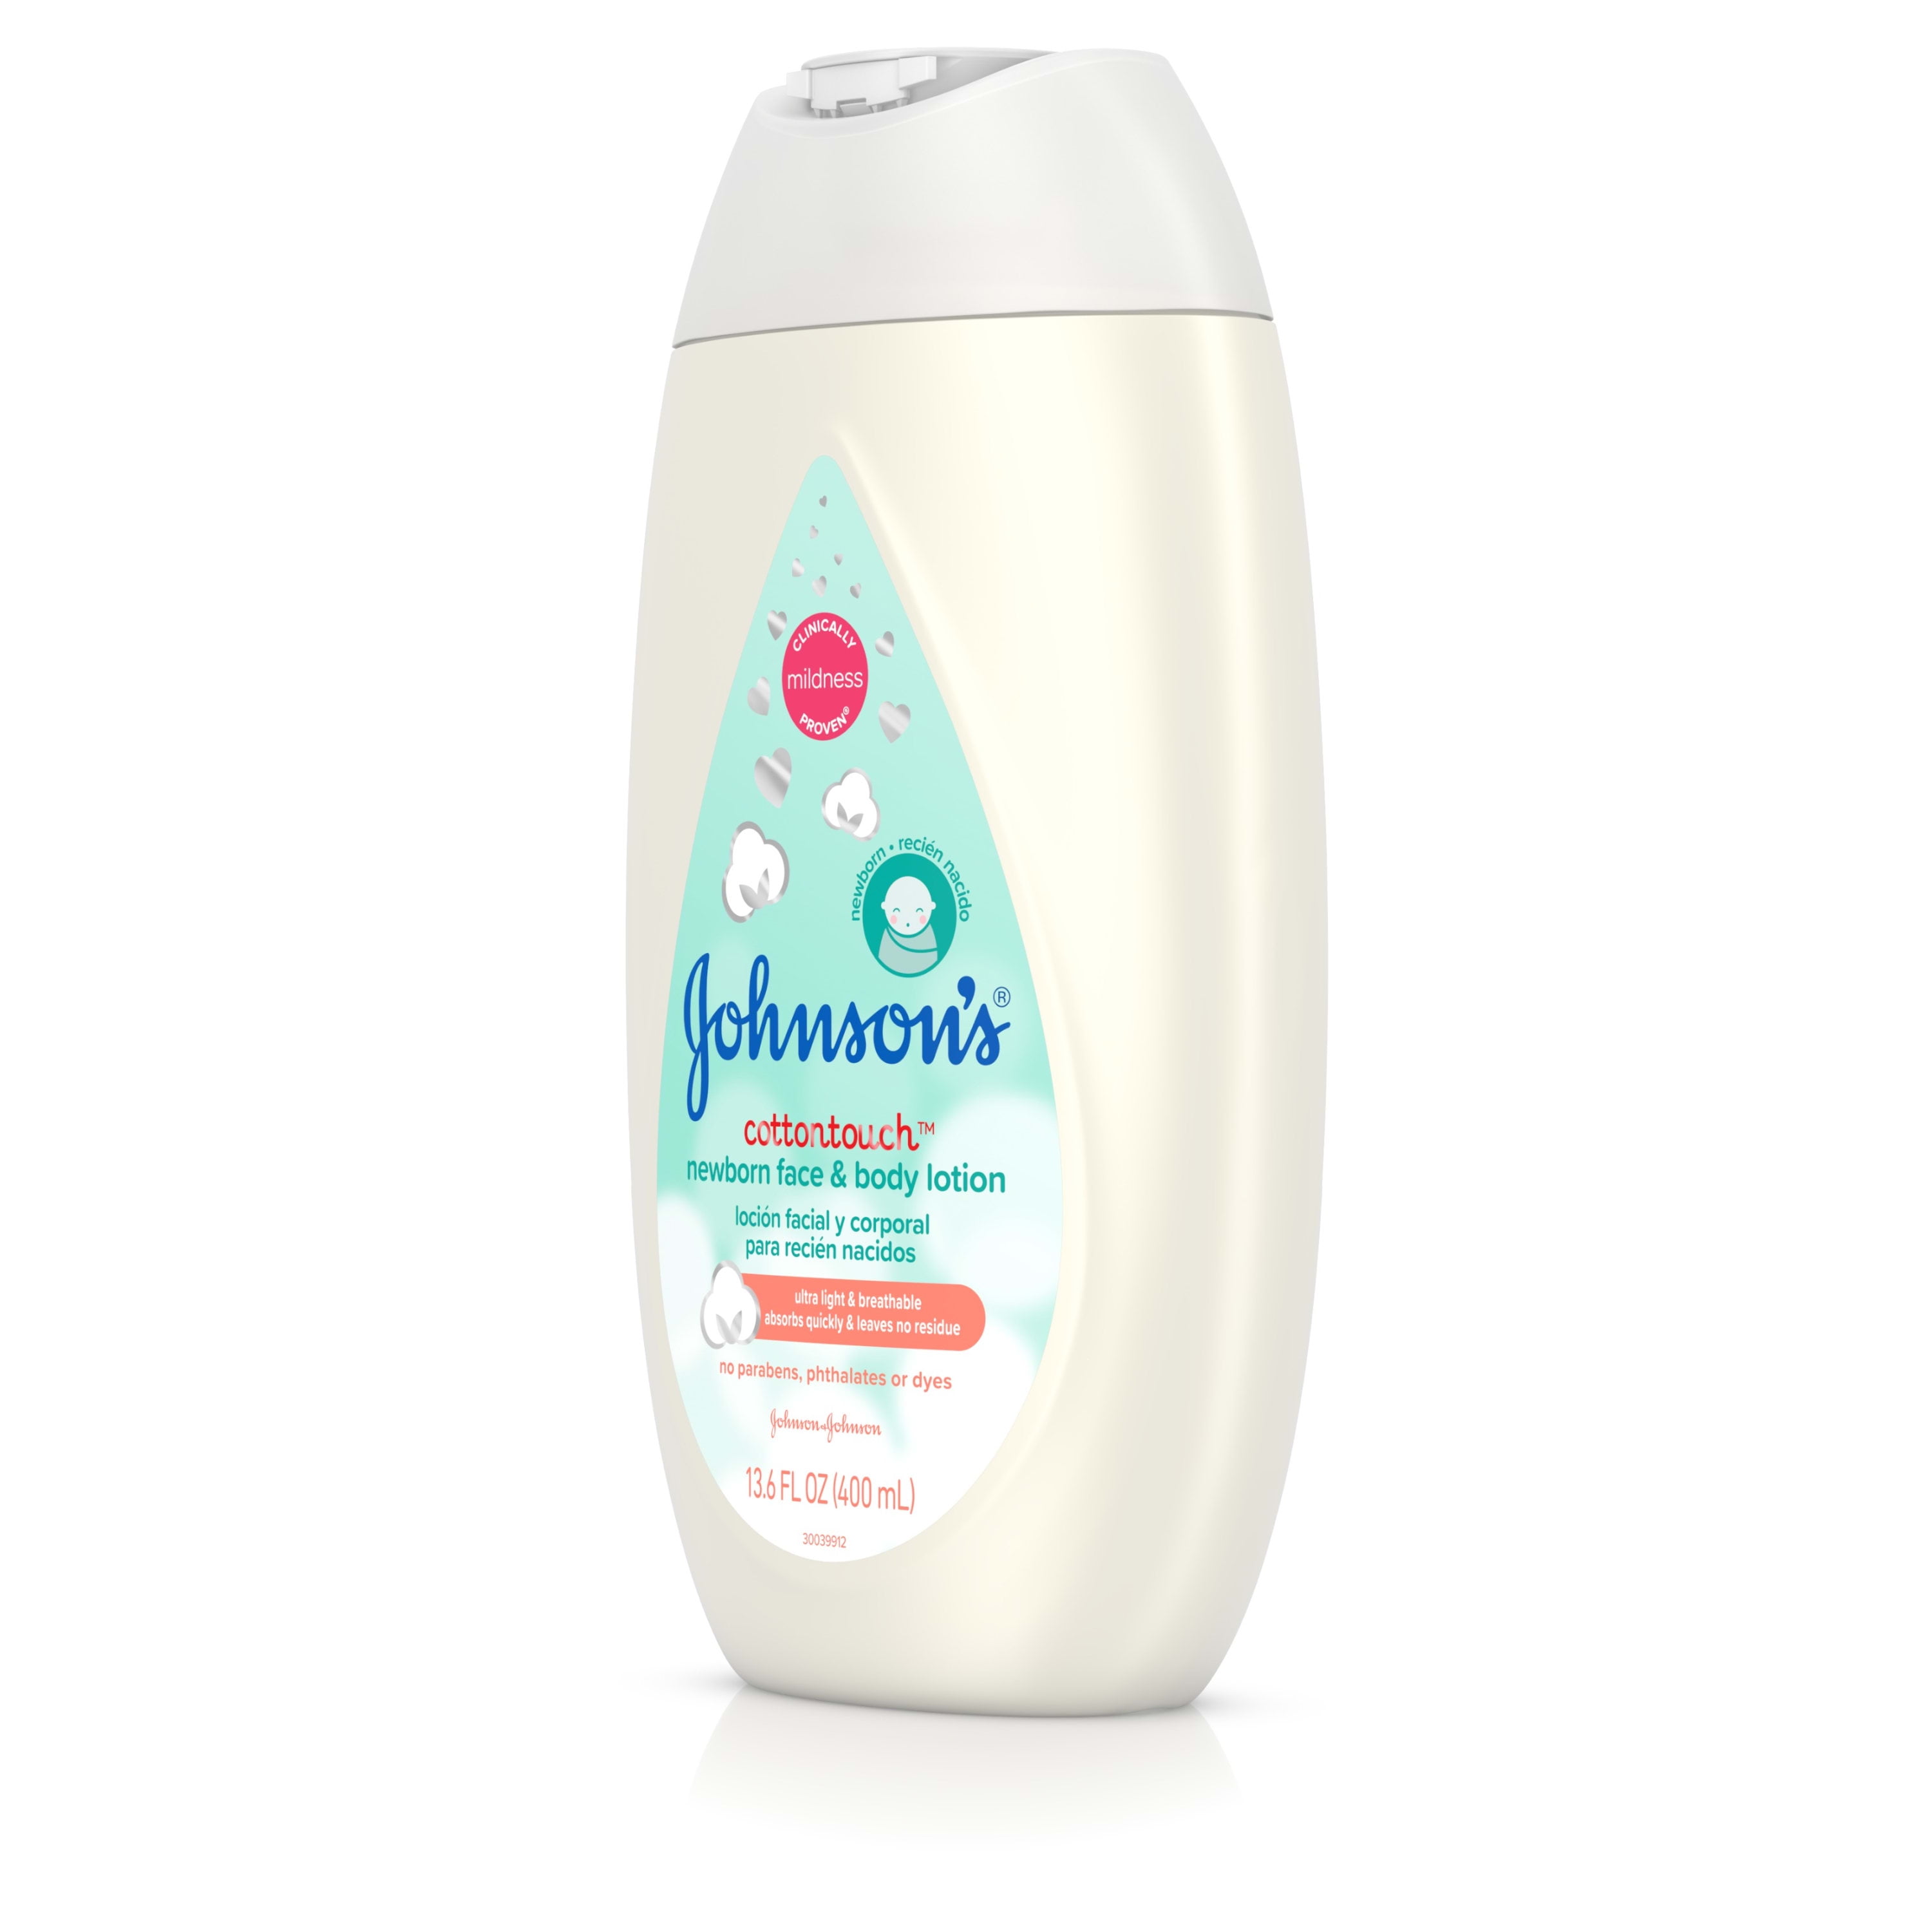 Johnson's CottonTouch Newborn Face and Body Lotion, 13.6 -